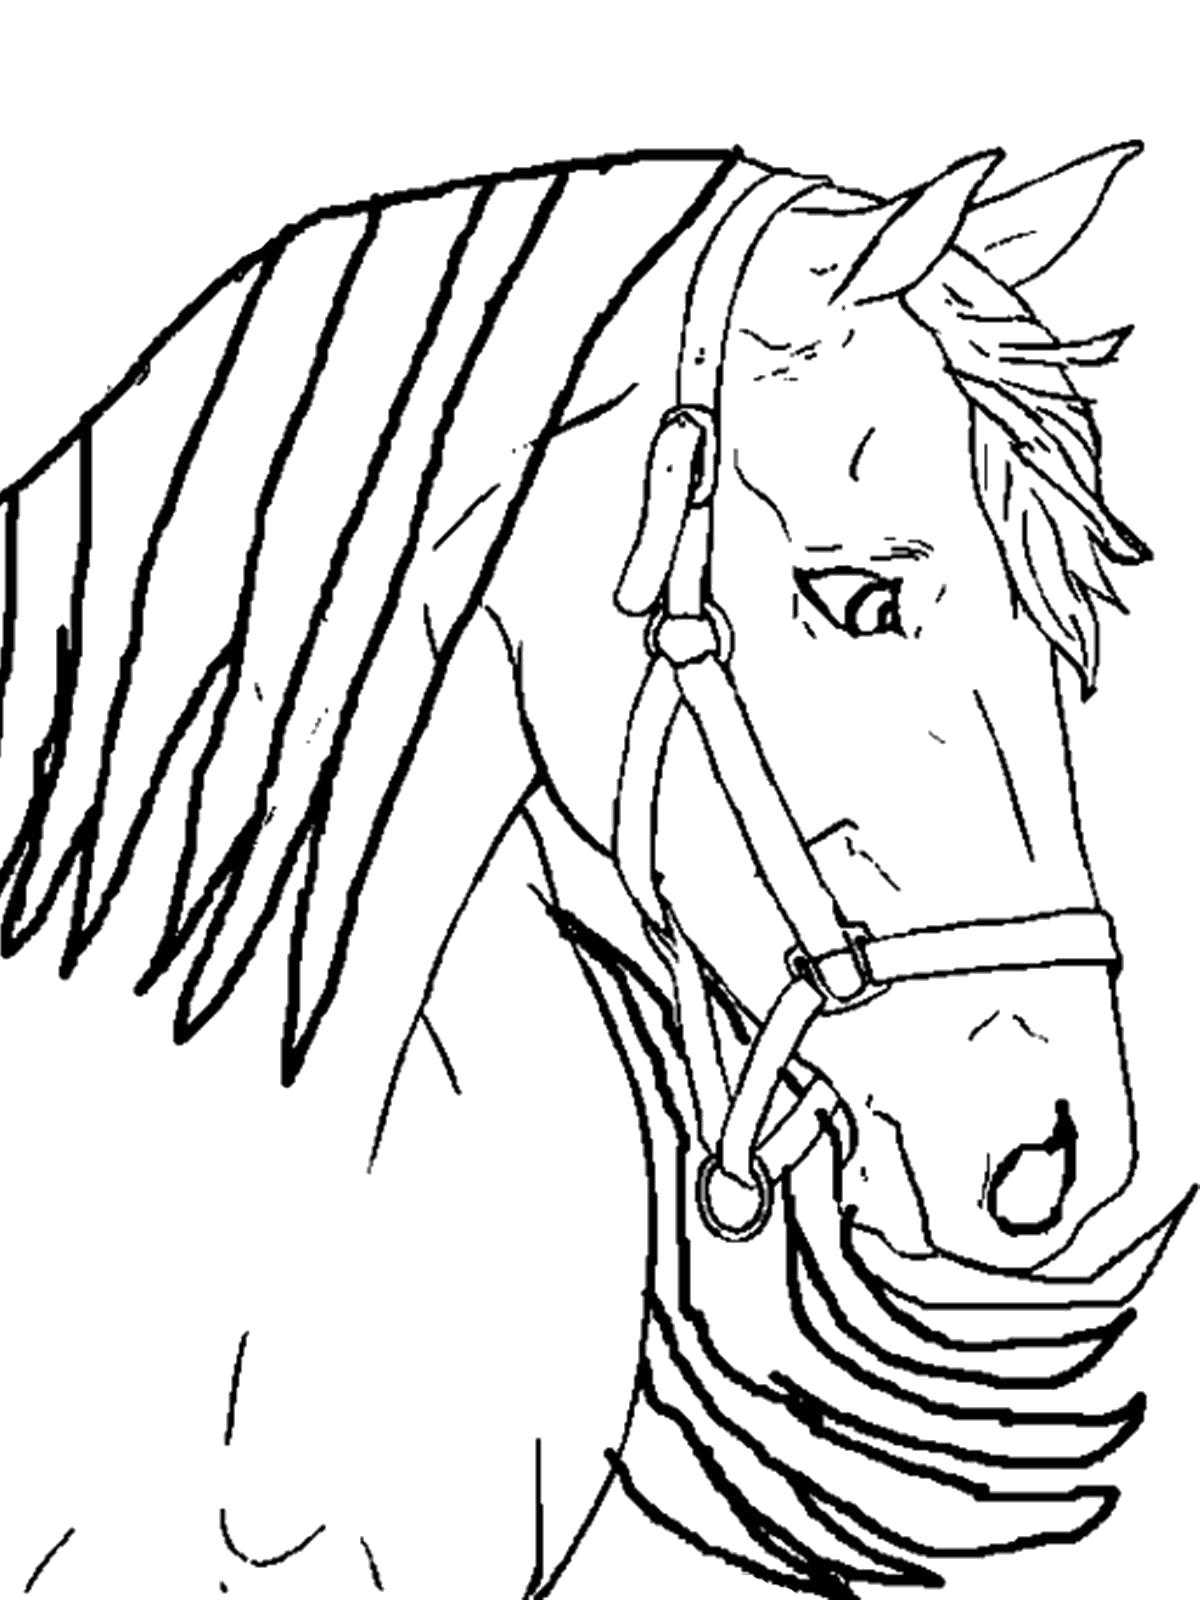 Coloring Horse head with bridle. Category Pets allowed. Tags:  the horse .